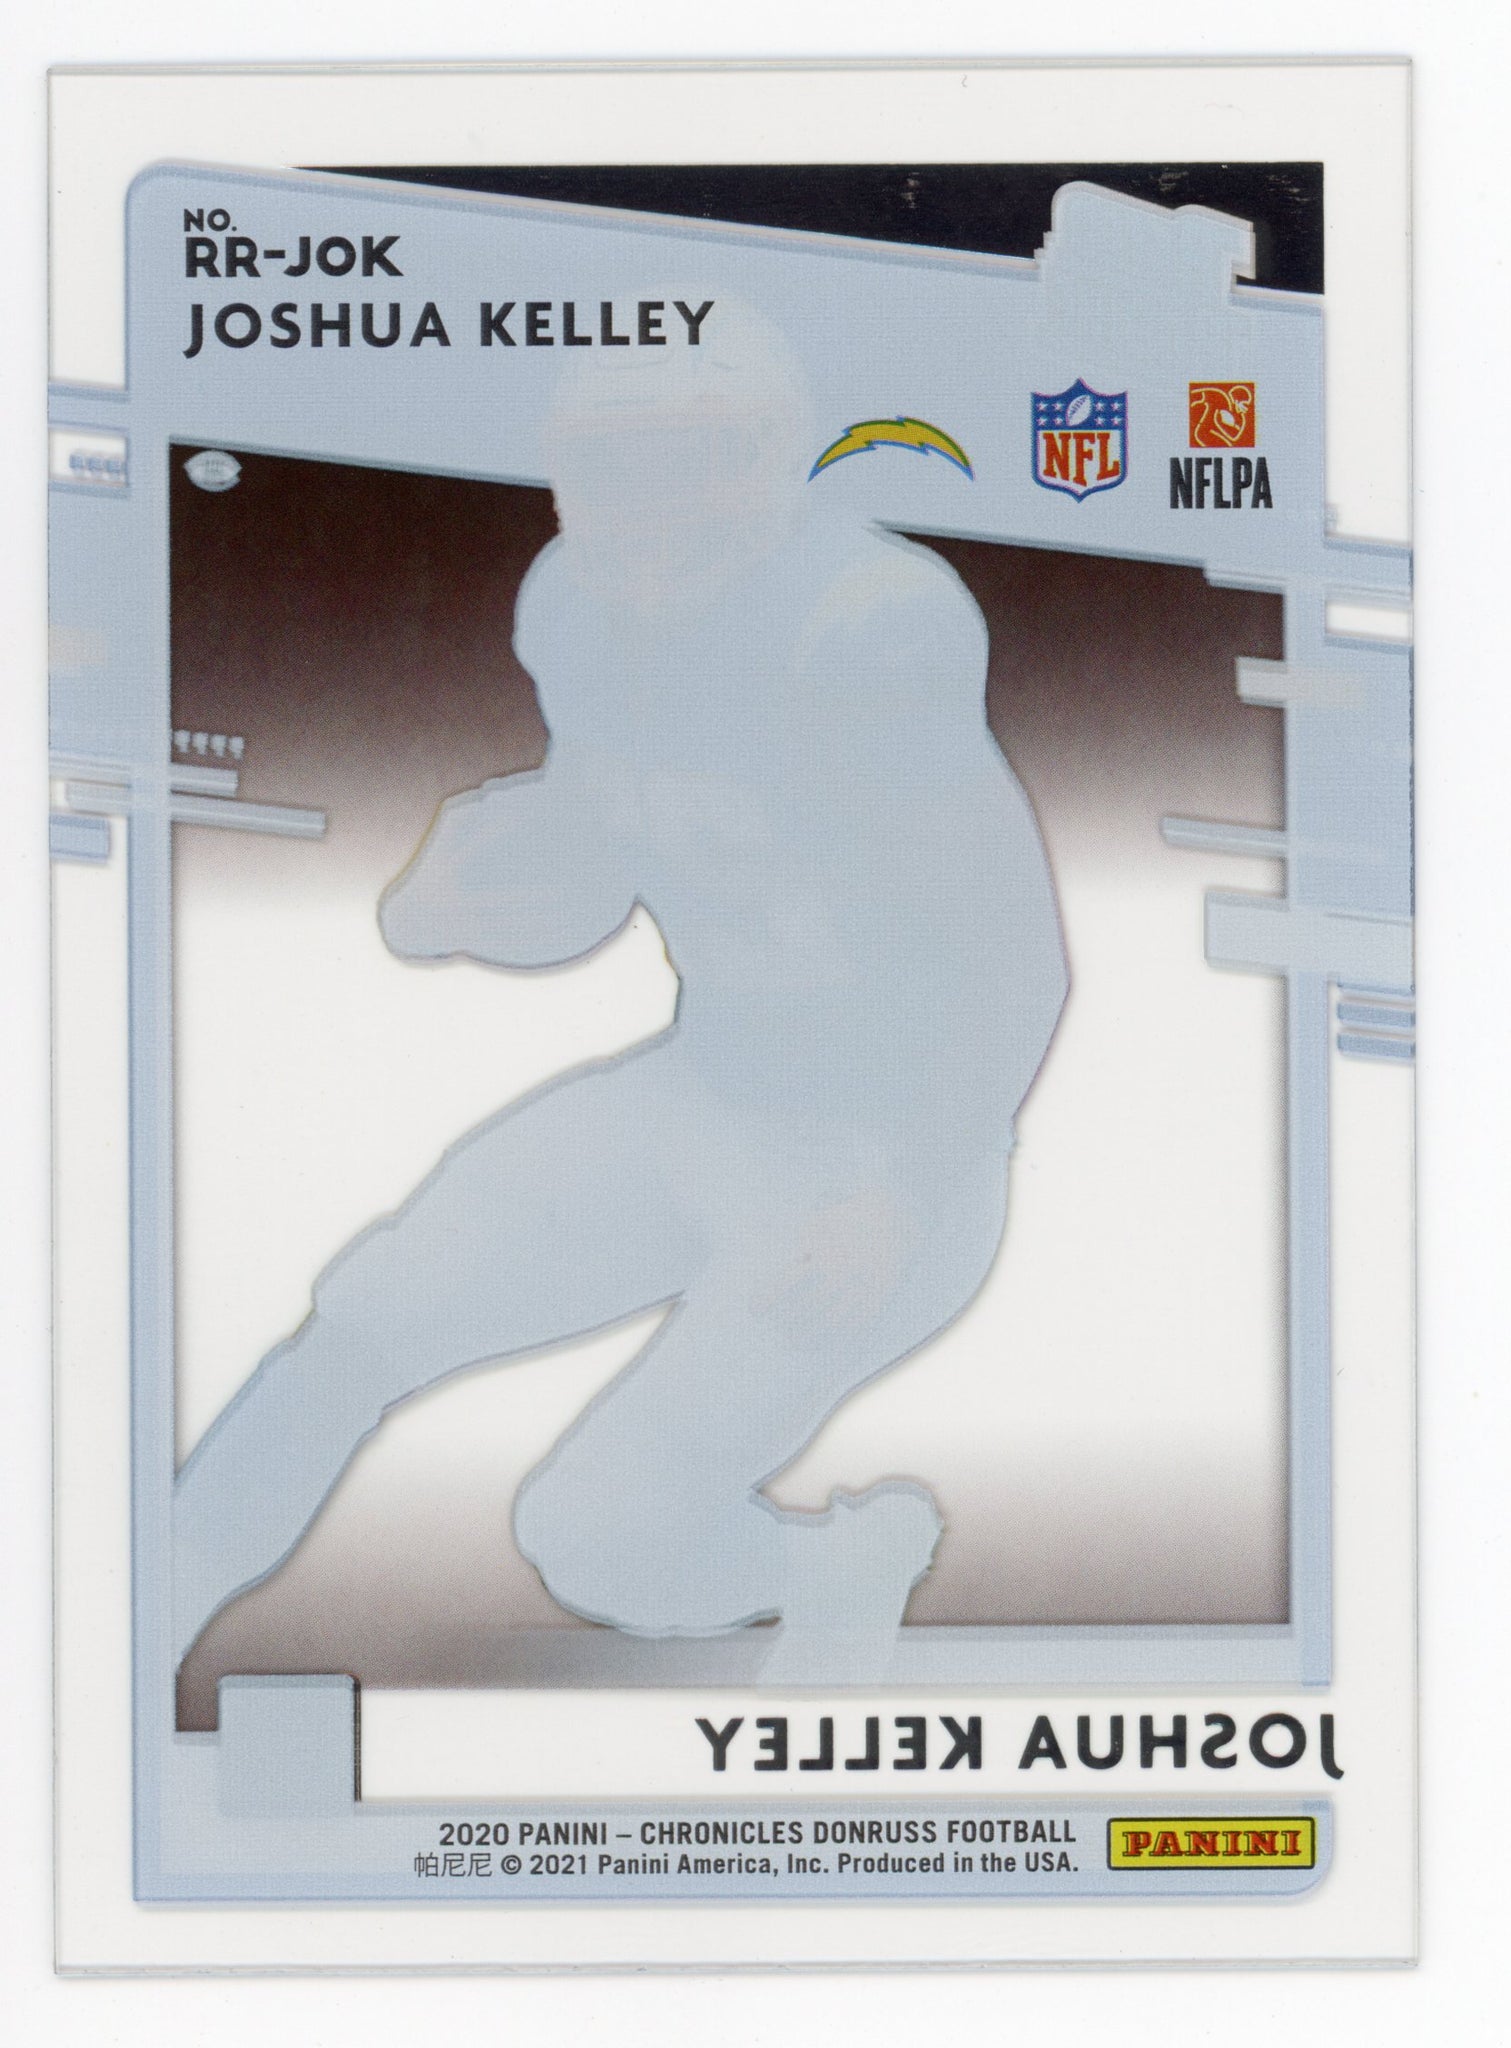 Joshua Kelley Panini 2020 Rated Rookie ClearlyLos Angeles Chargers #RR-JOK